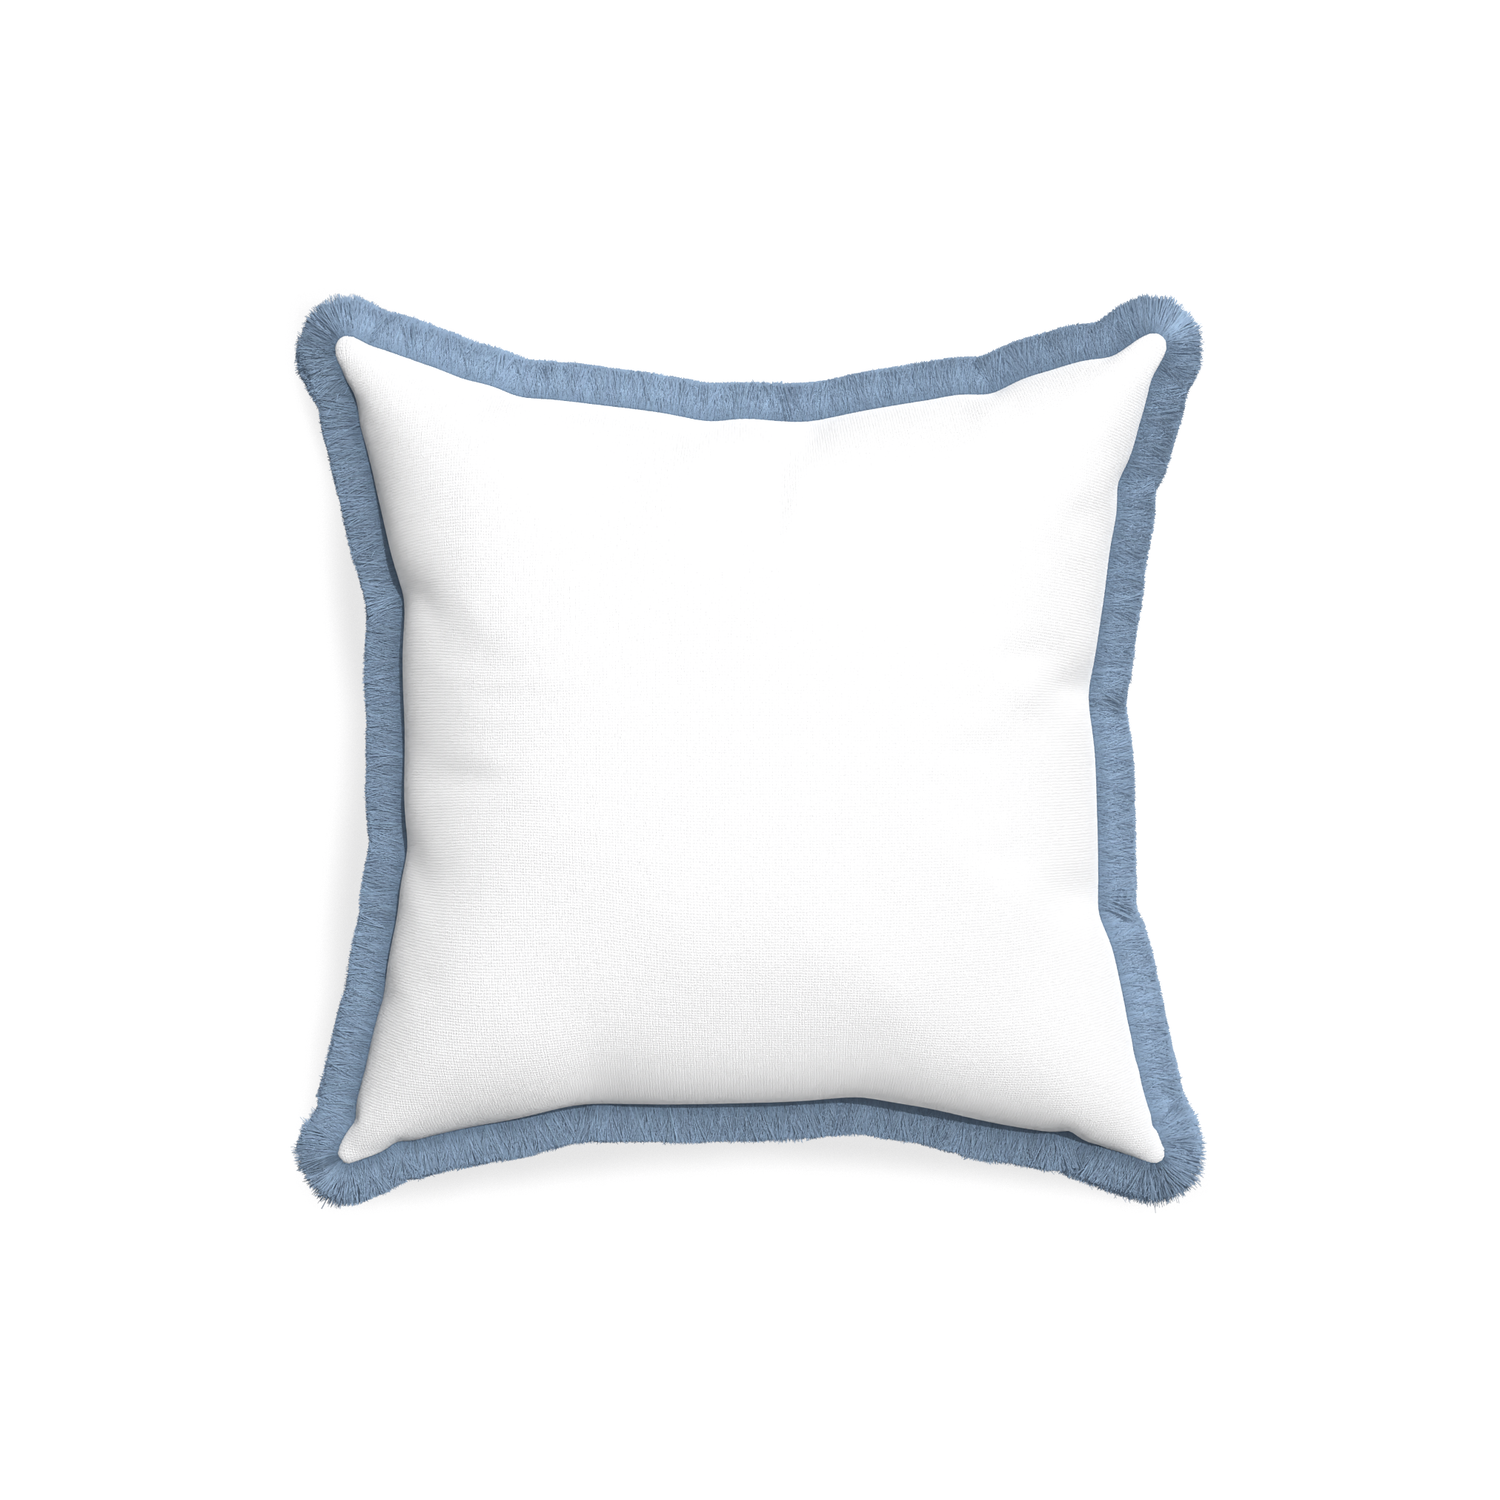 18-square snow custom pillow with sky fringe on white background